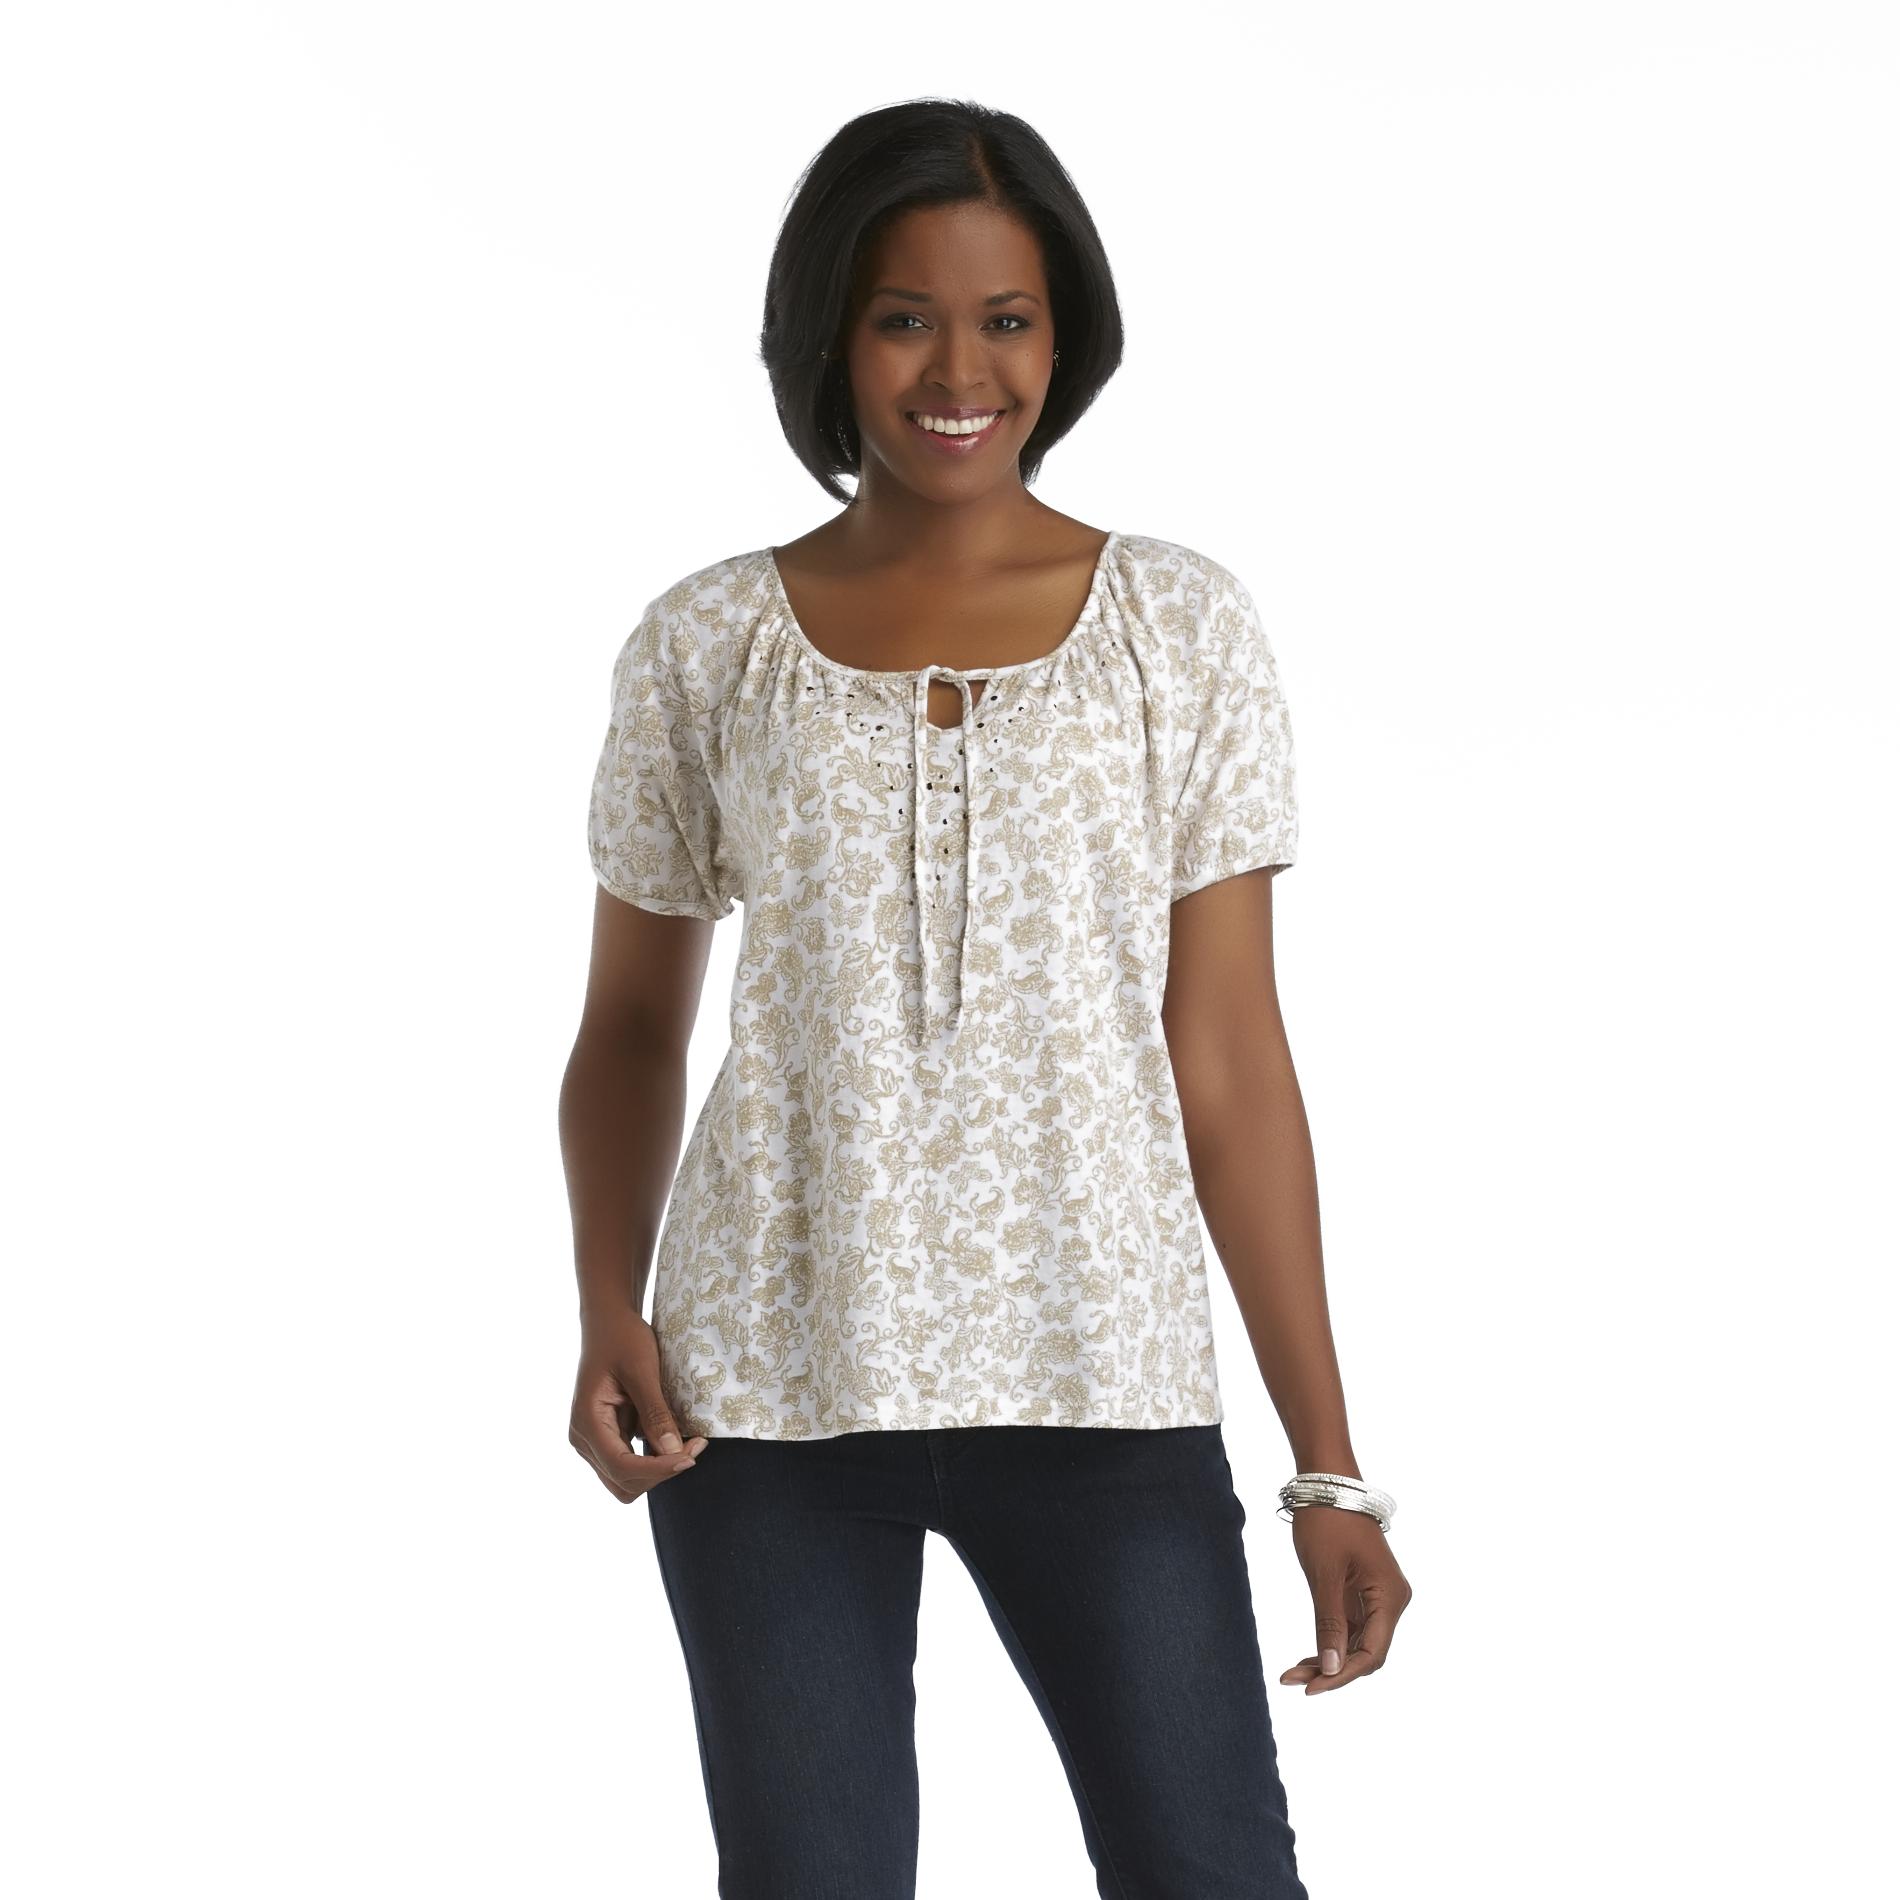 Basic Editions Women's Embellished Peasant Top - Paisley